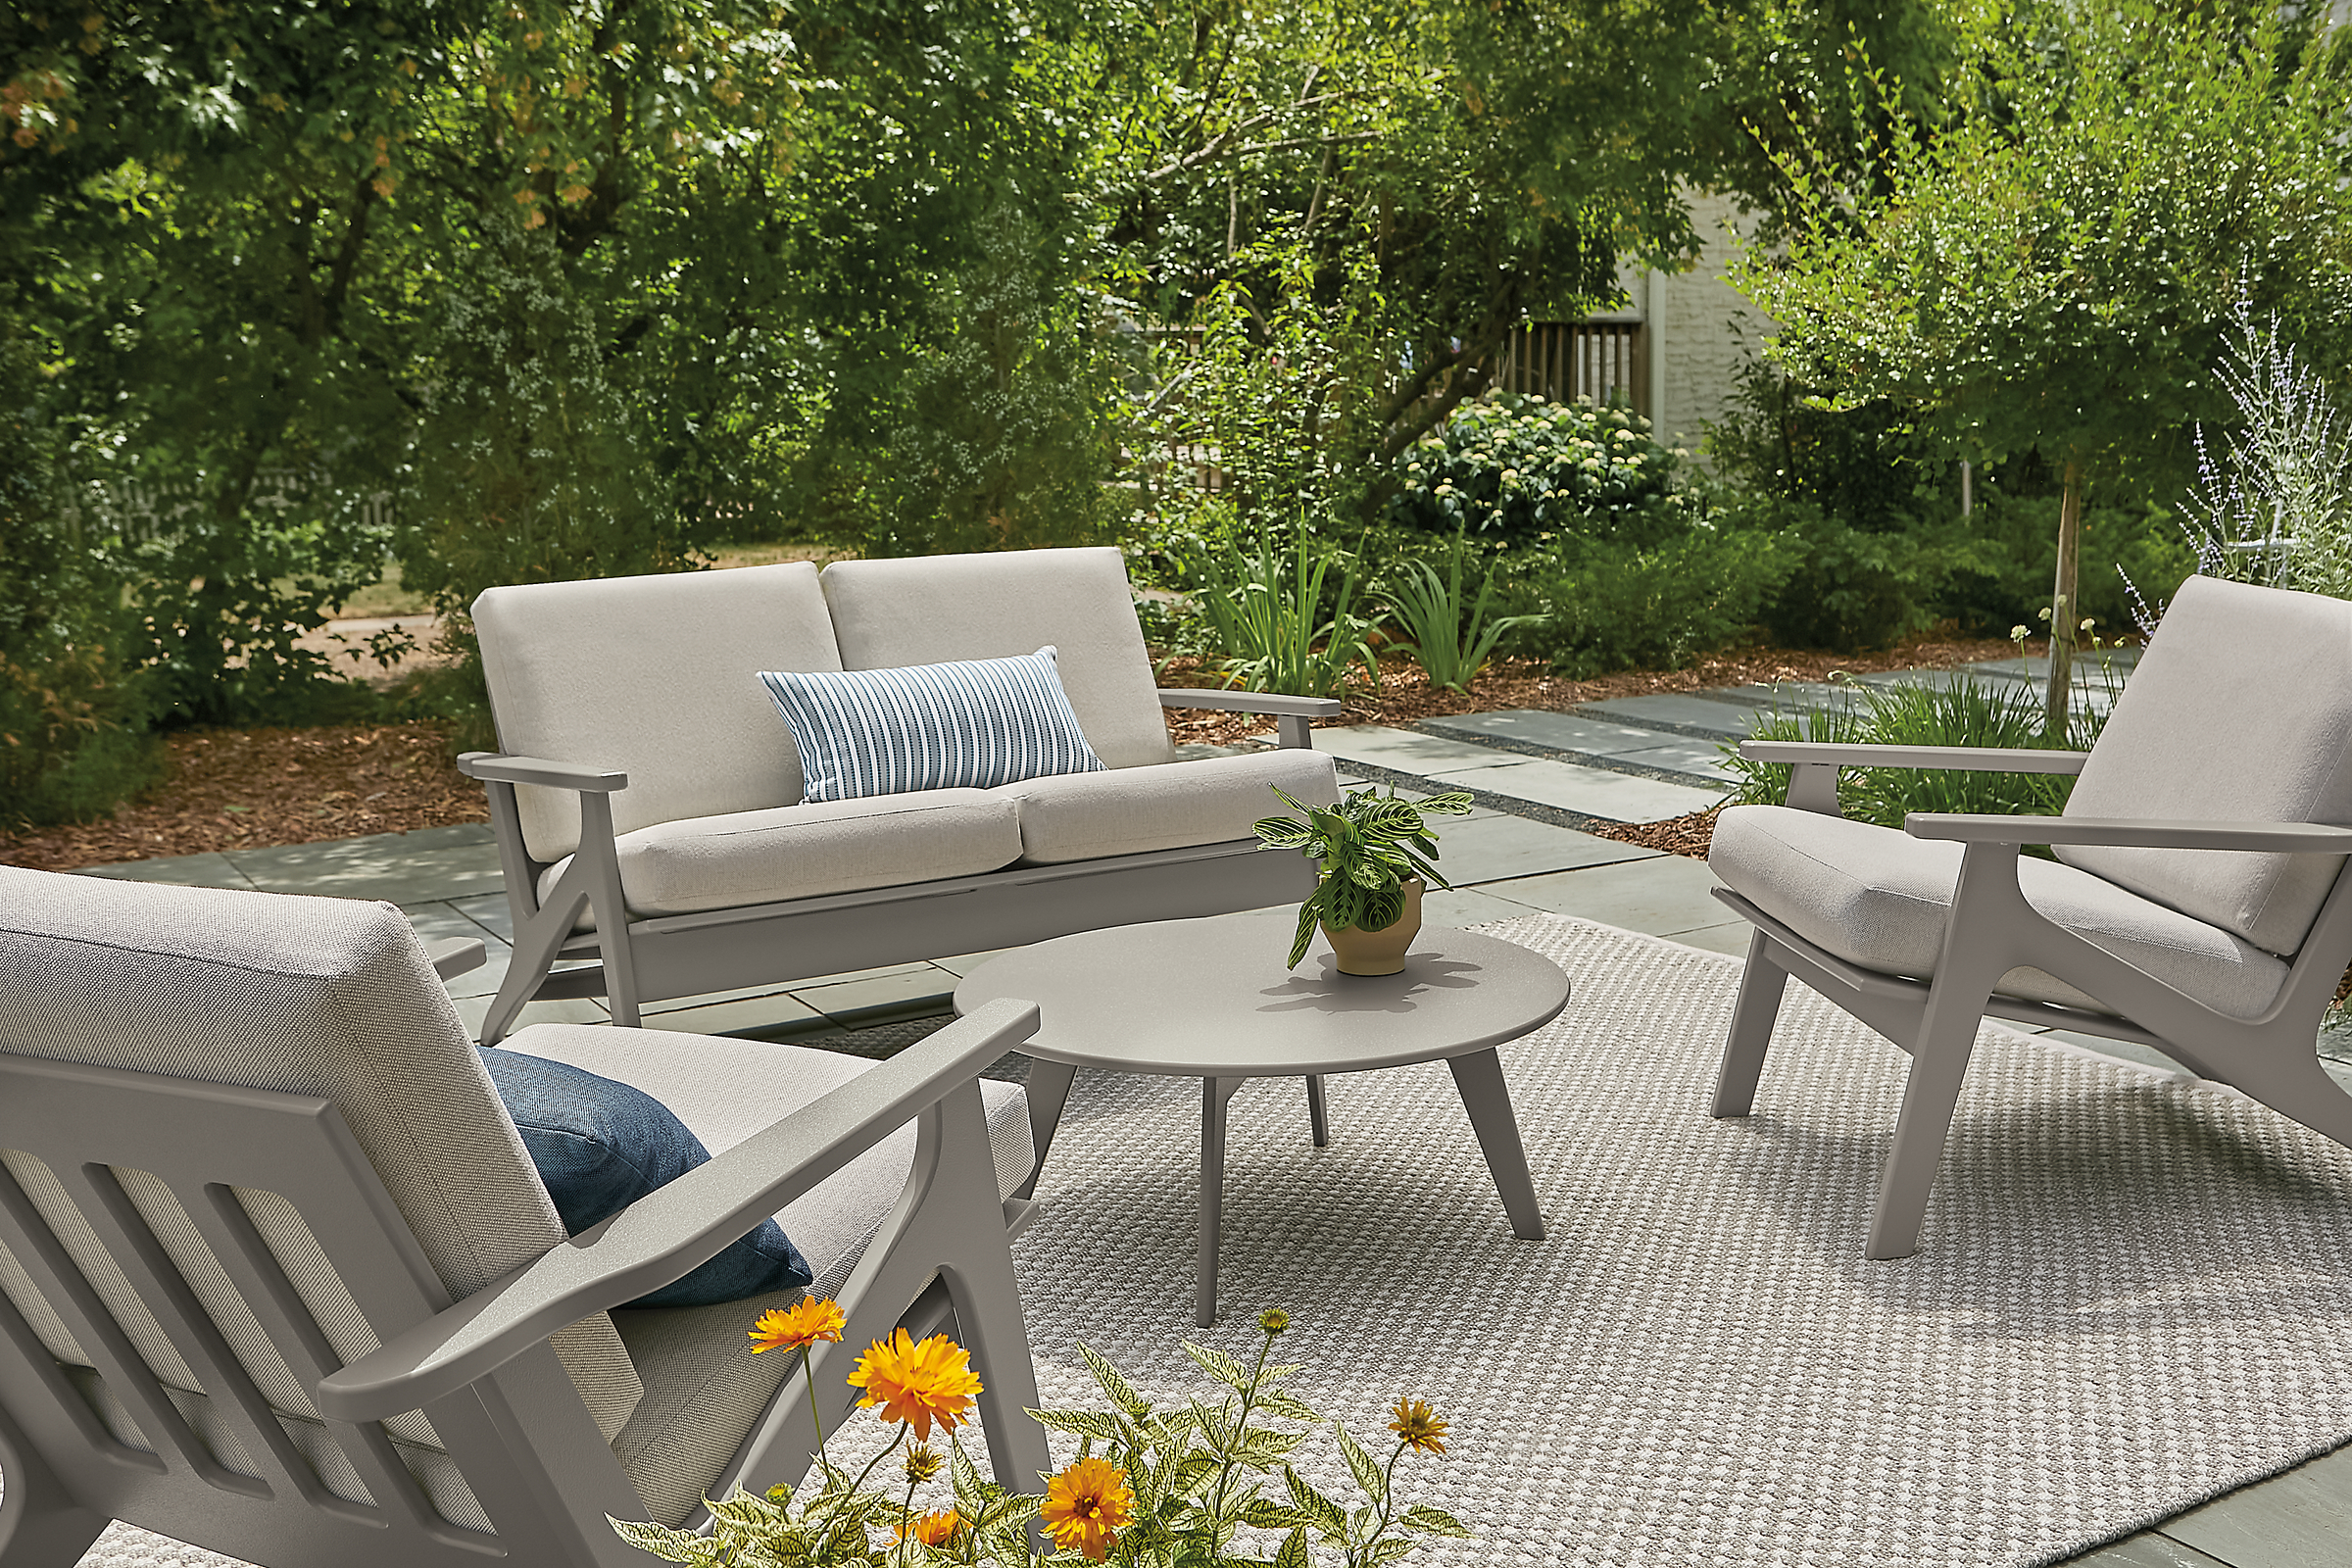 outdoor space with two breeze chairs, a breeze sofa and a nova coffee table in putty colorway.